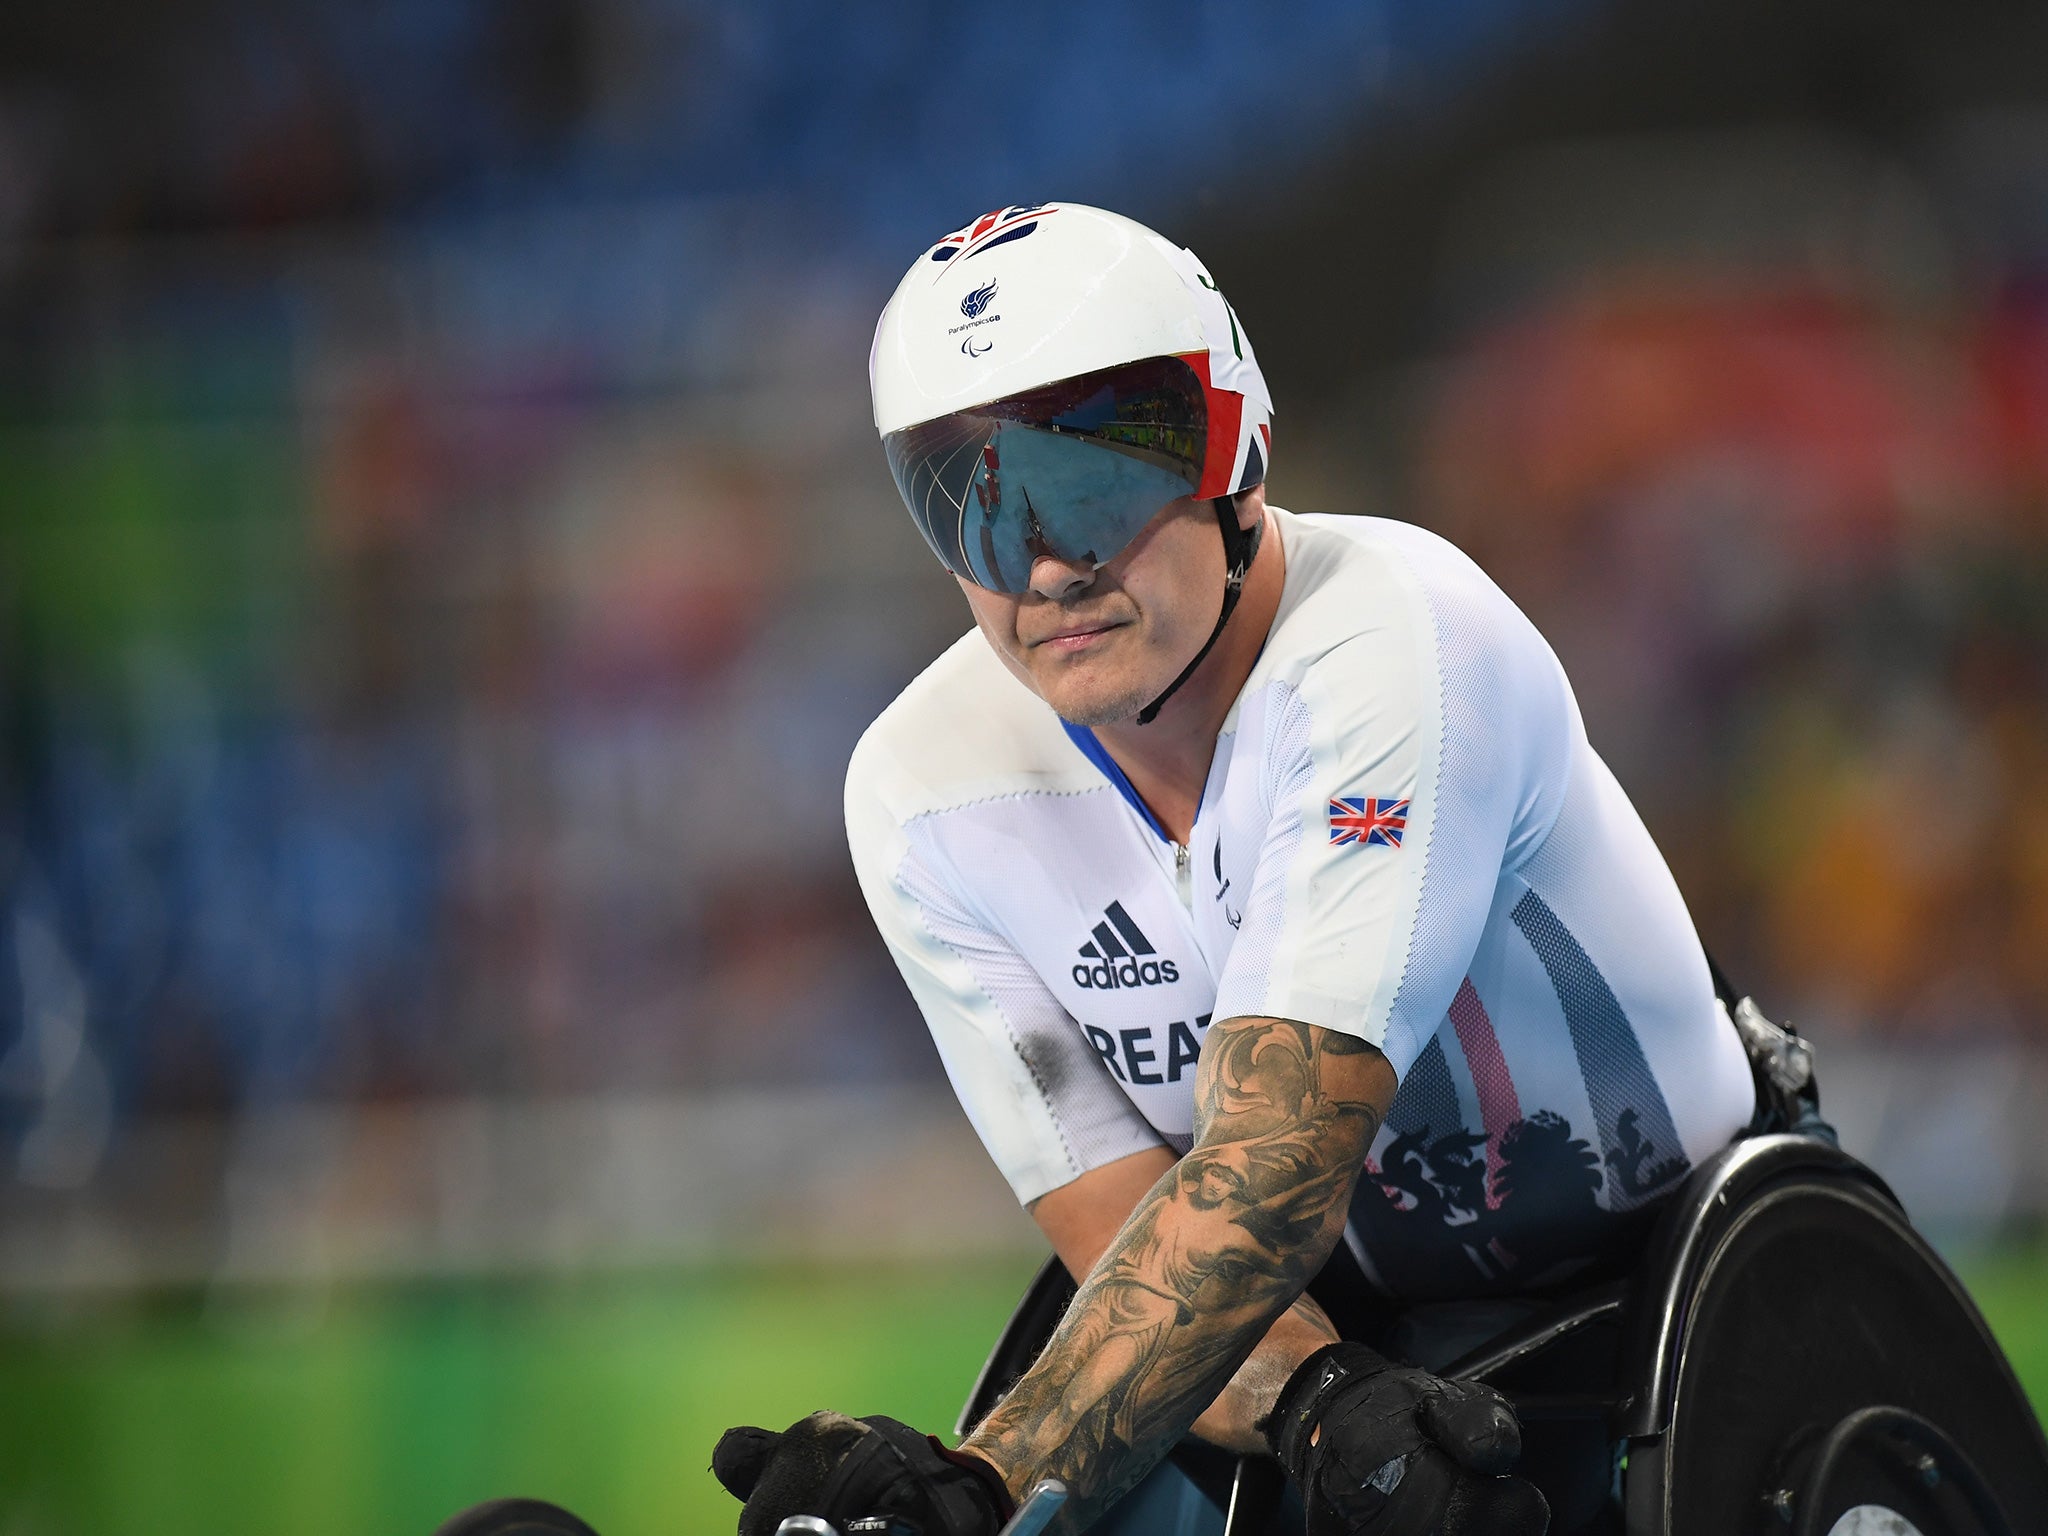 Six-time Paralympic champion Weir was racing at his final Games